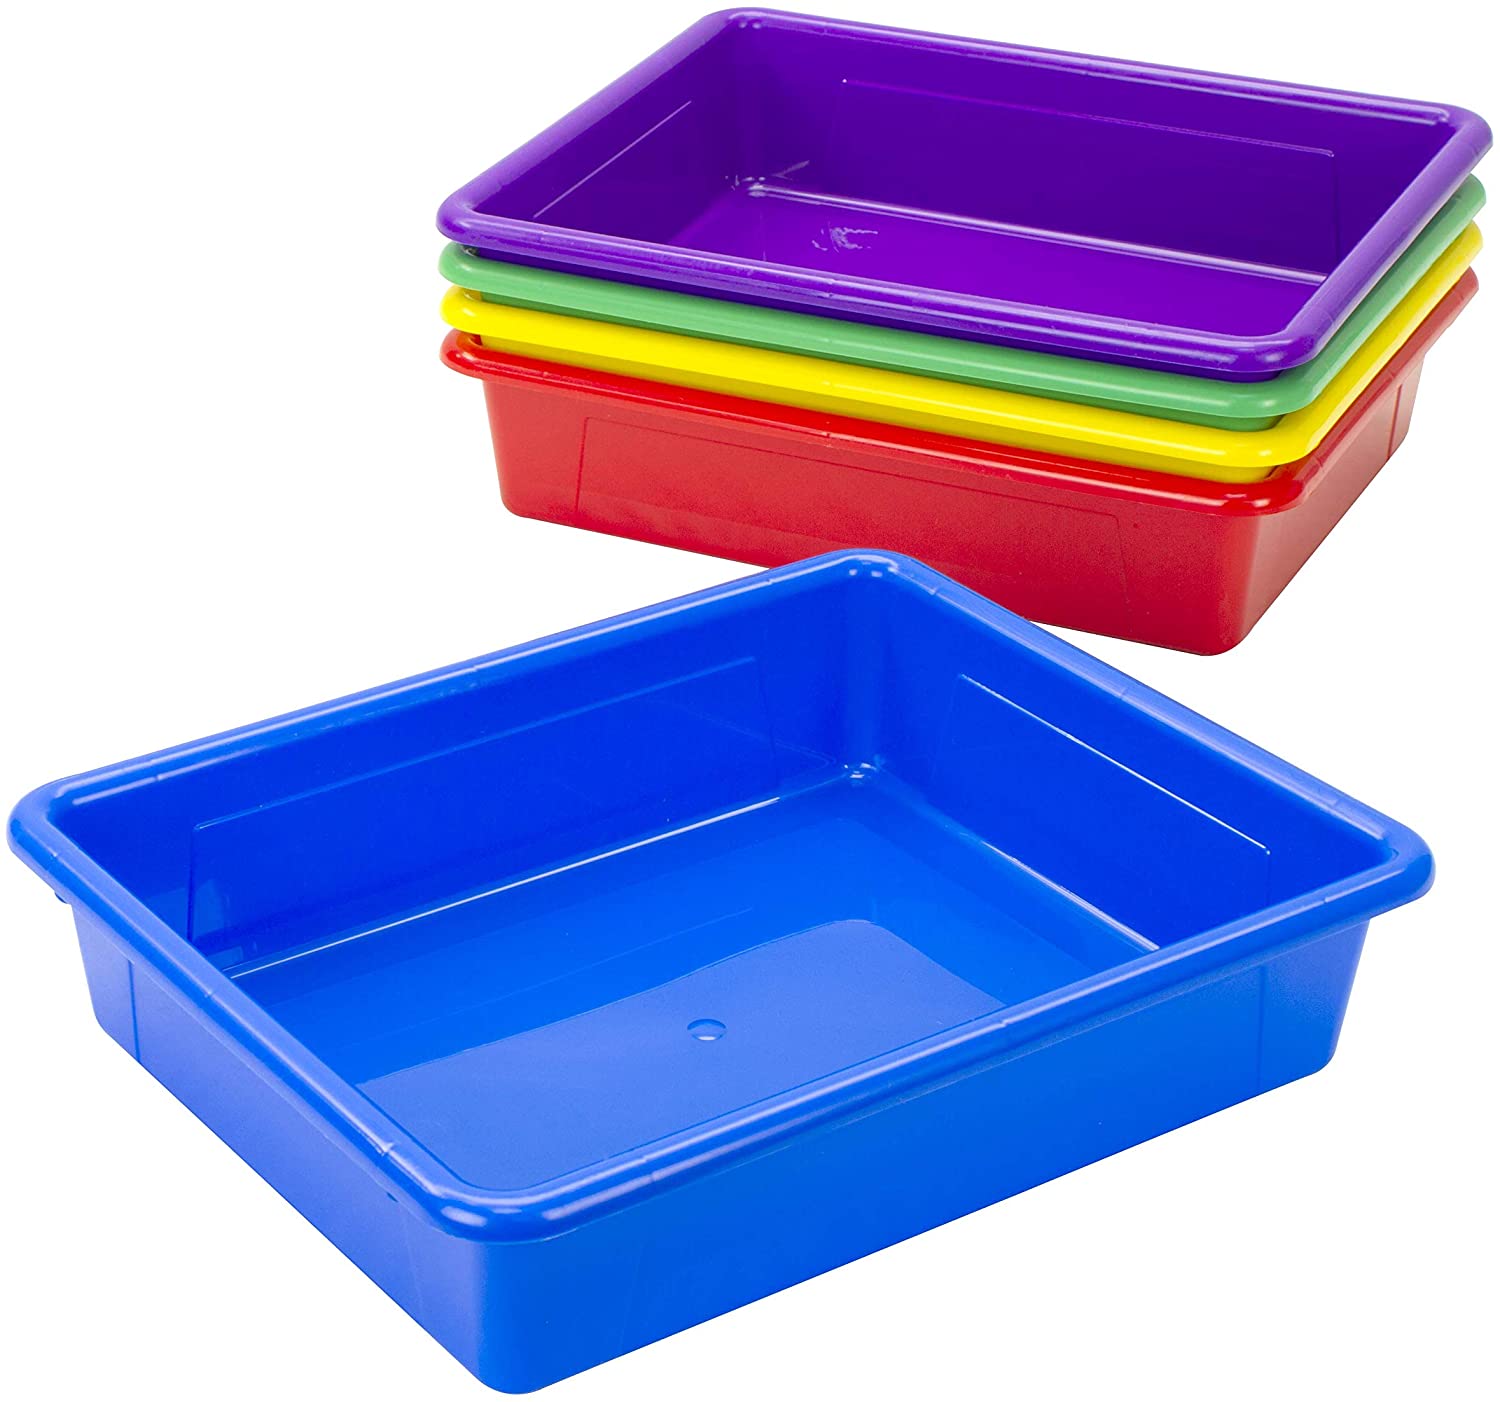 Storage trays are a great way to organize papers in your classroom.